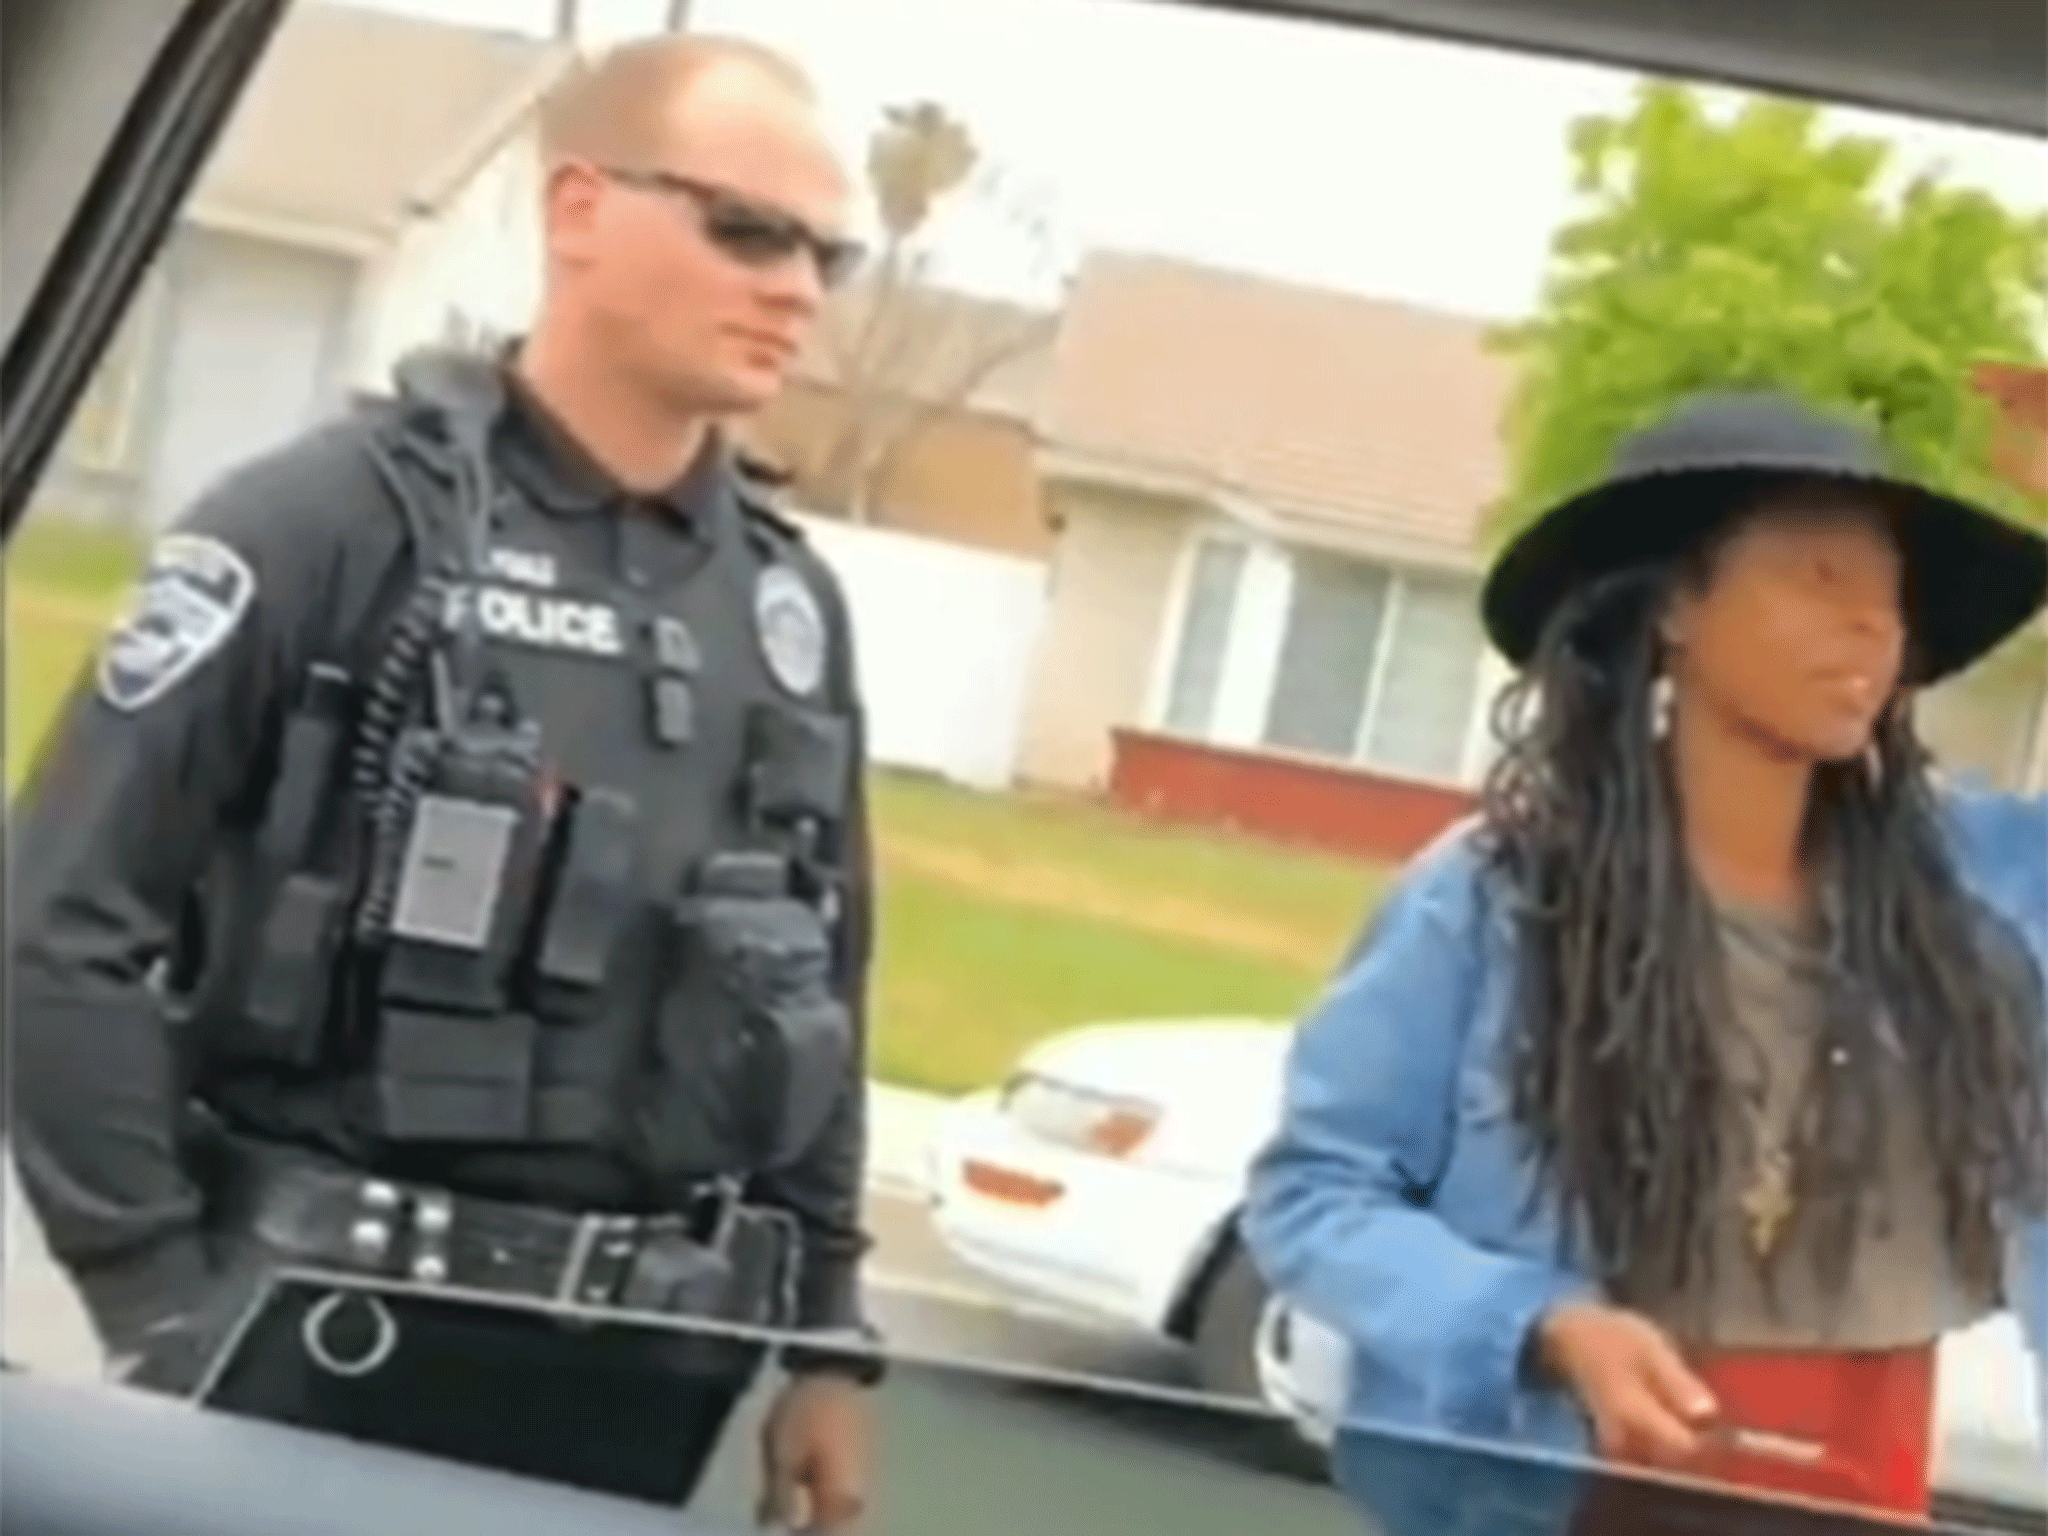 Huge police response called to tackle three black Airbnb guests 